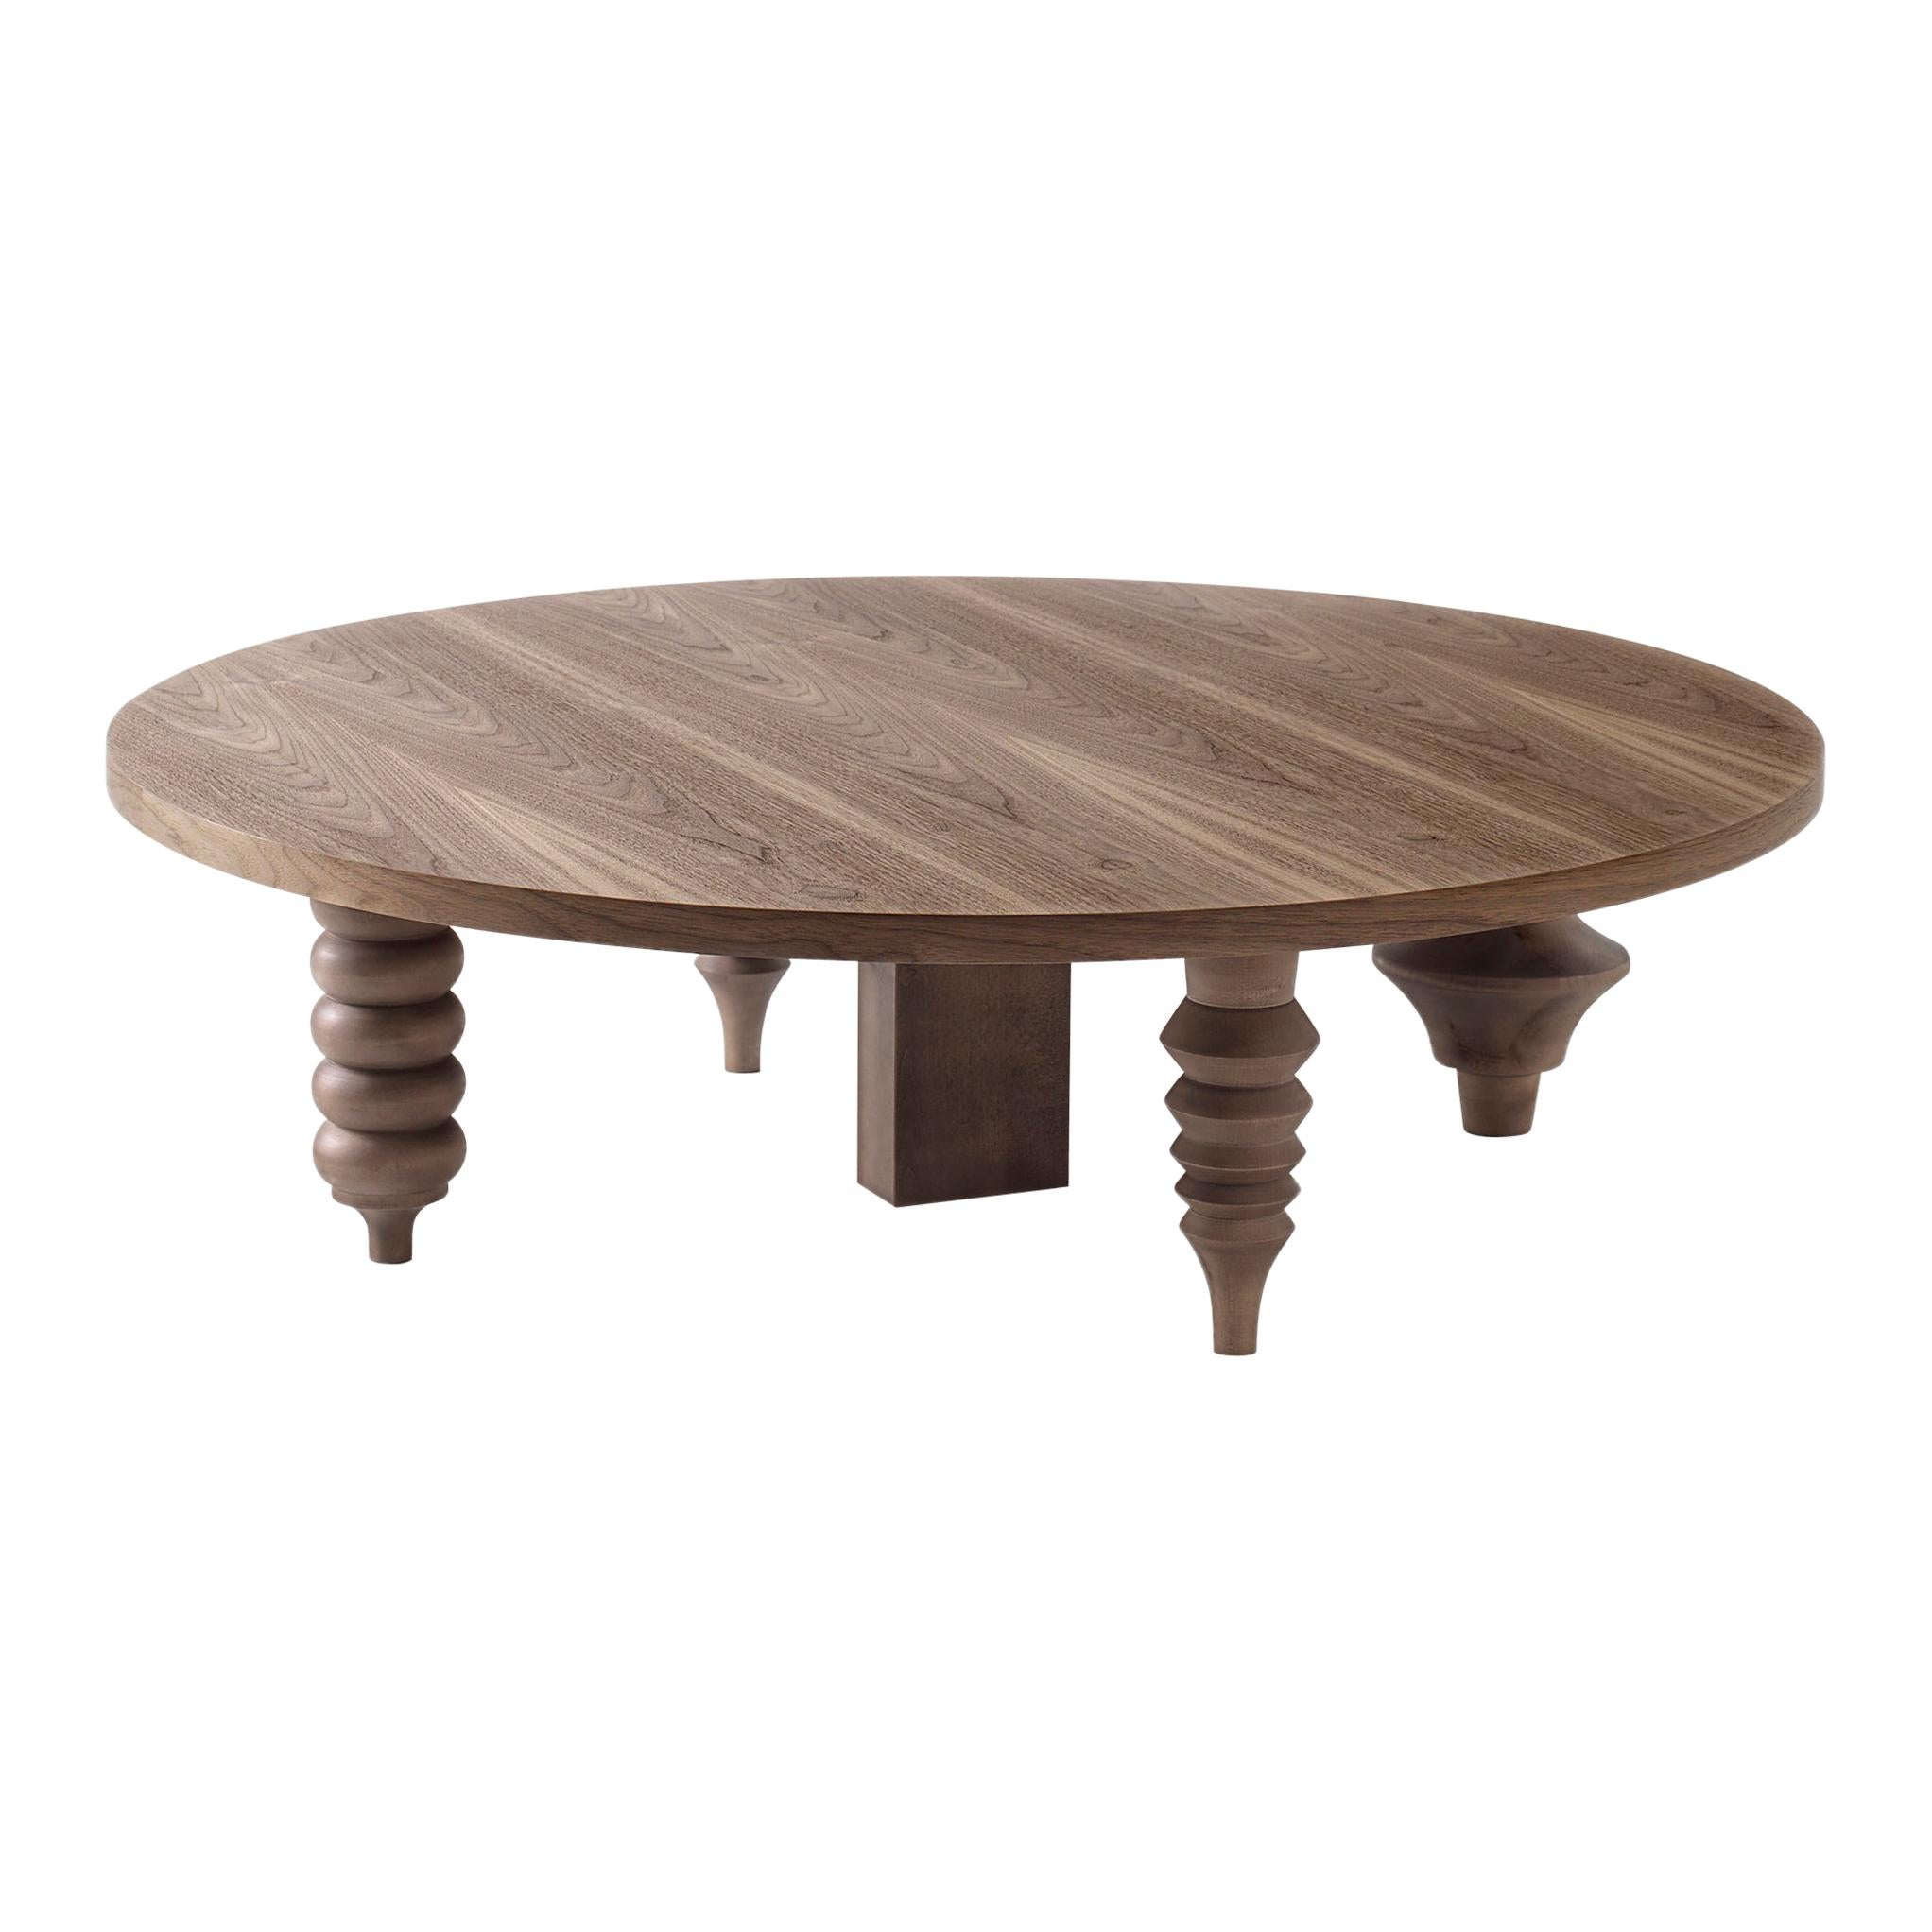 Jaime Hayon Rounded Multi Leg Low Table by BD Barcelona